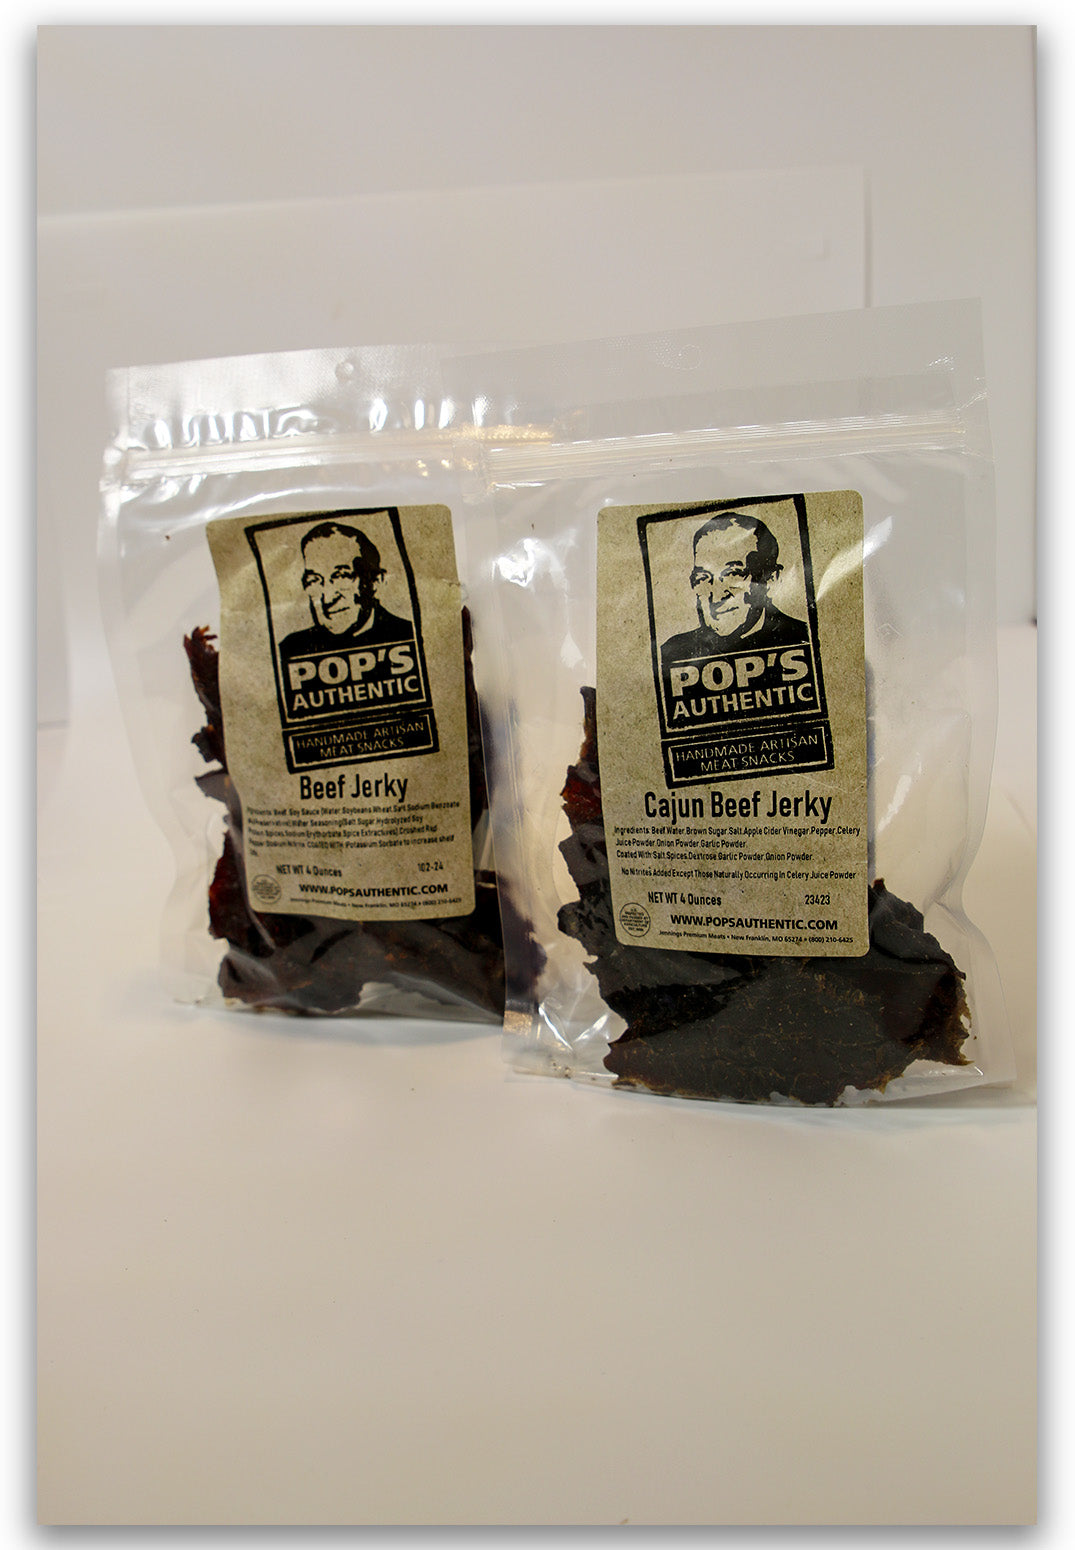 Two of Pop’s Authentic Jerky flavor packages 